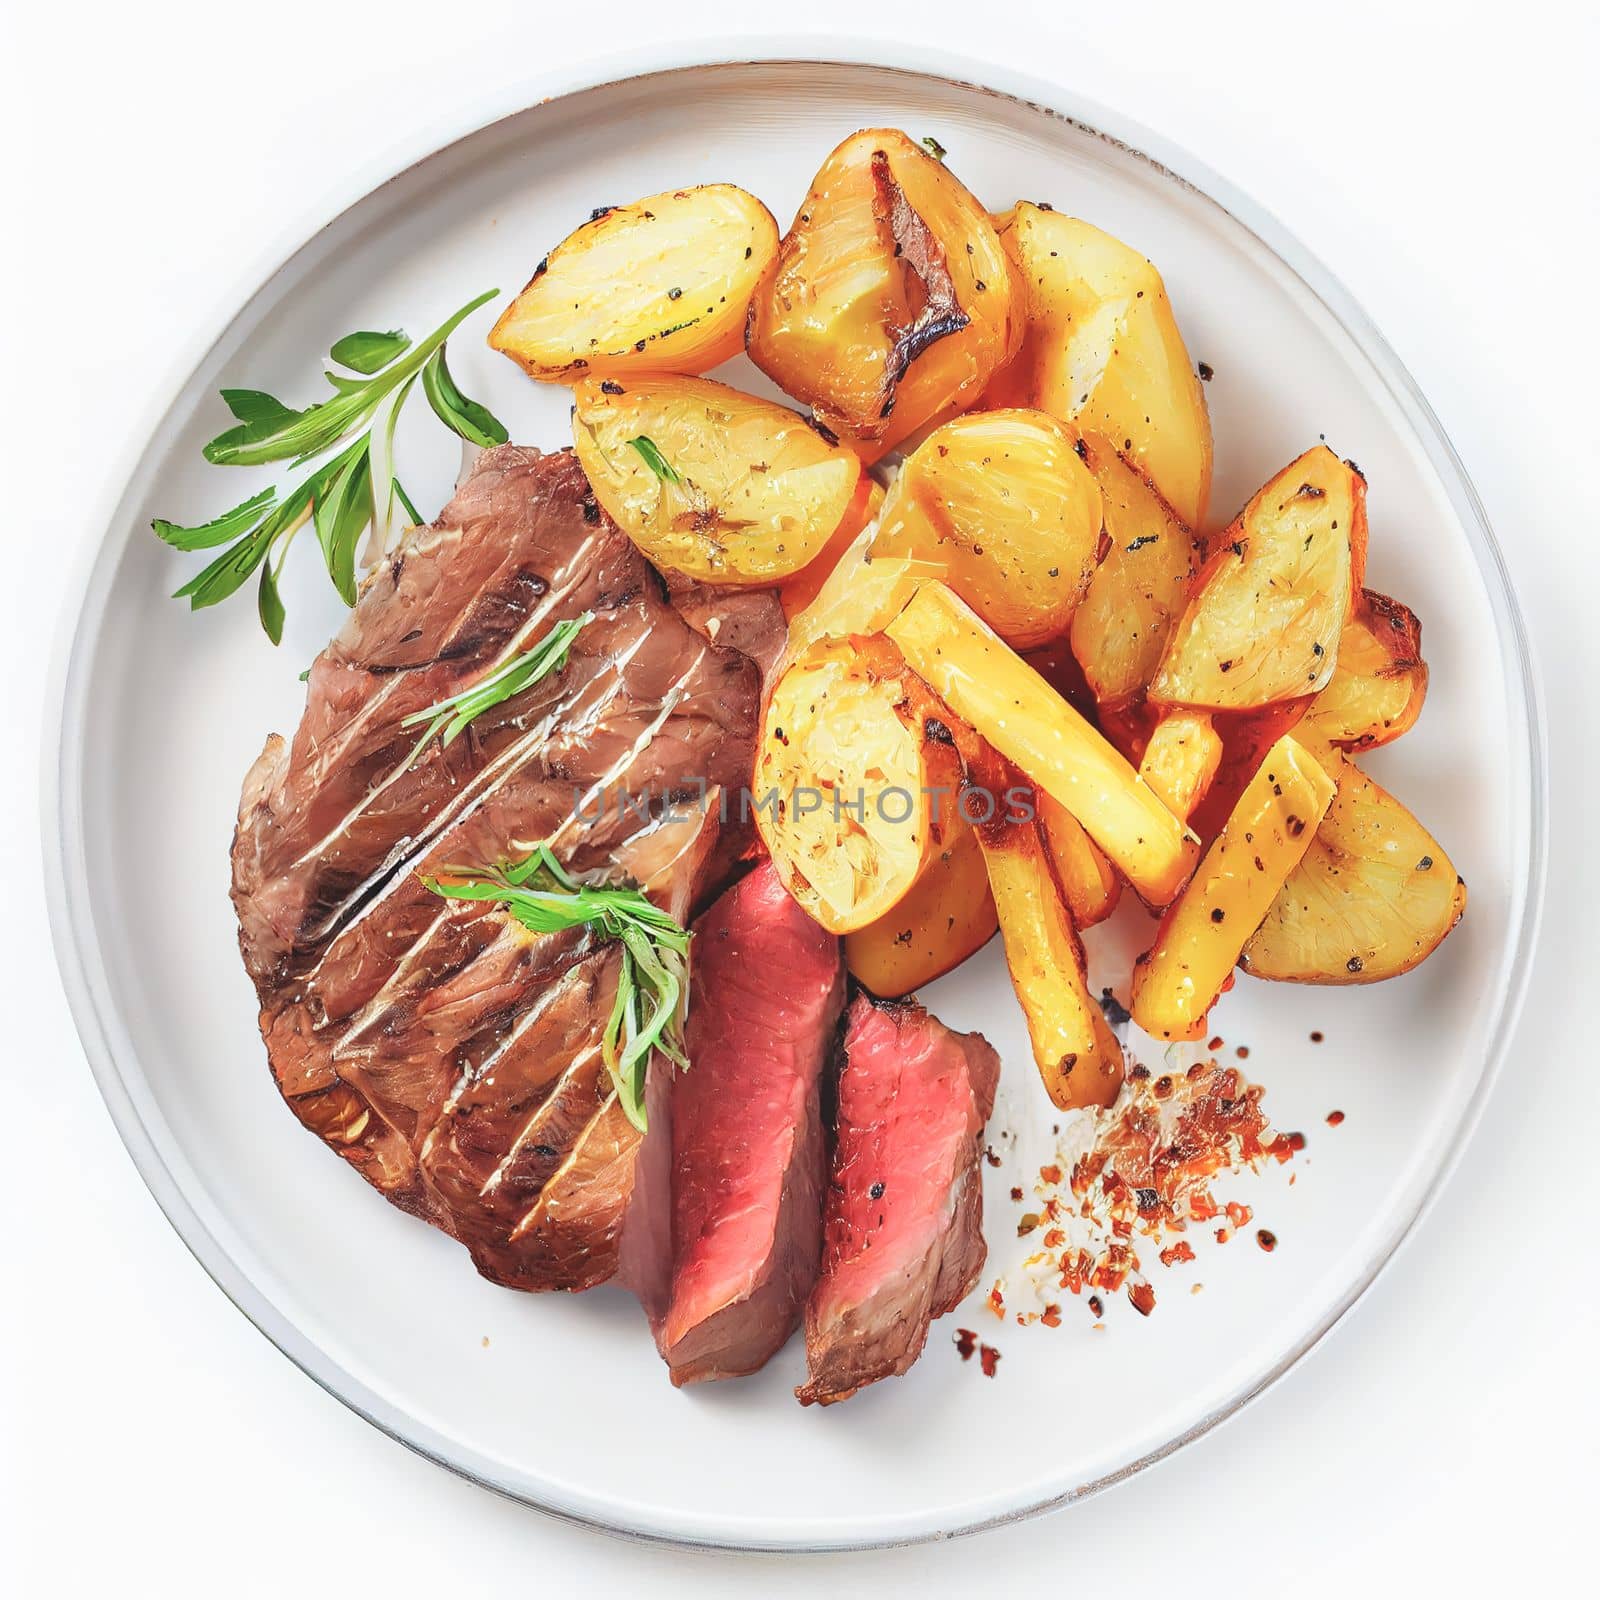 Close up shot of top view grilled beef steak and potatoes isolated on white background. American dishes collection of recipes popular in USA. These comfort foods are popular at picnics, barbecues, and sporting events.